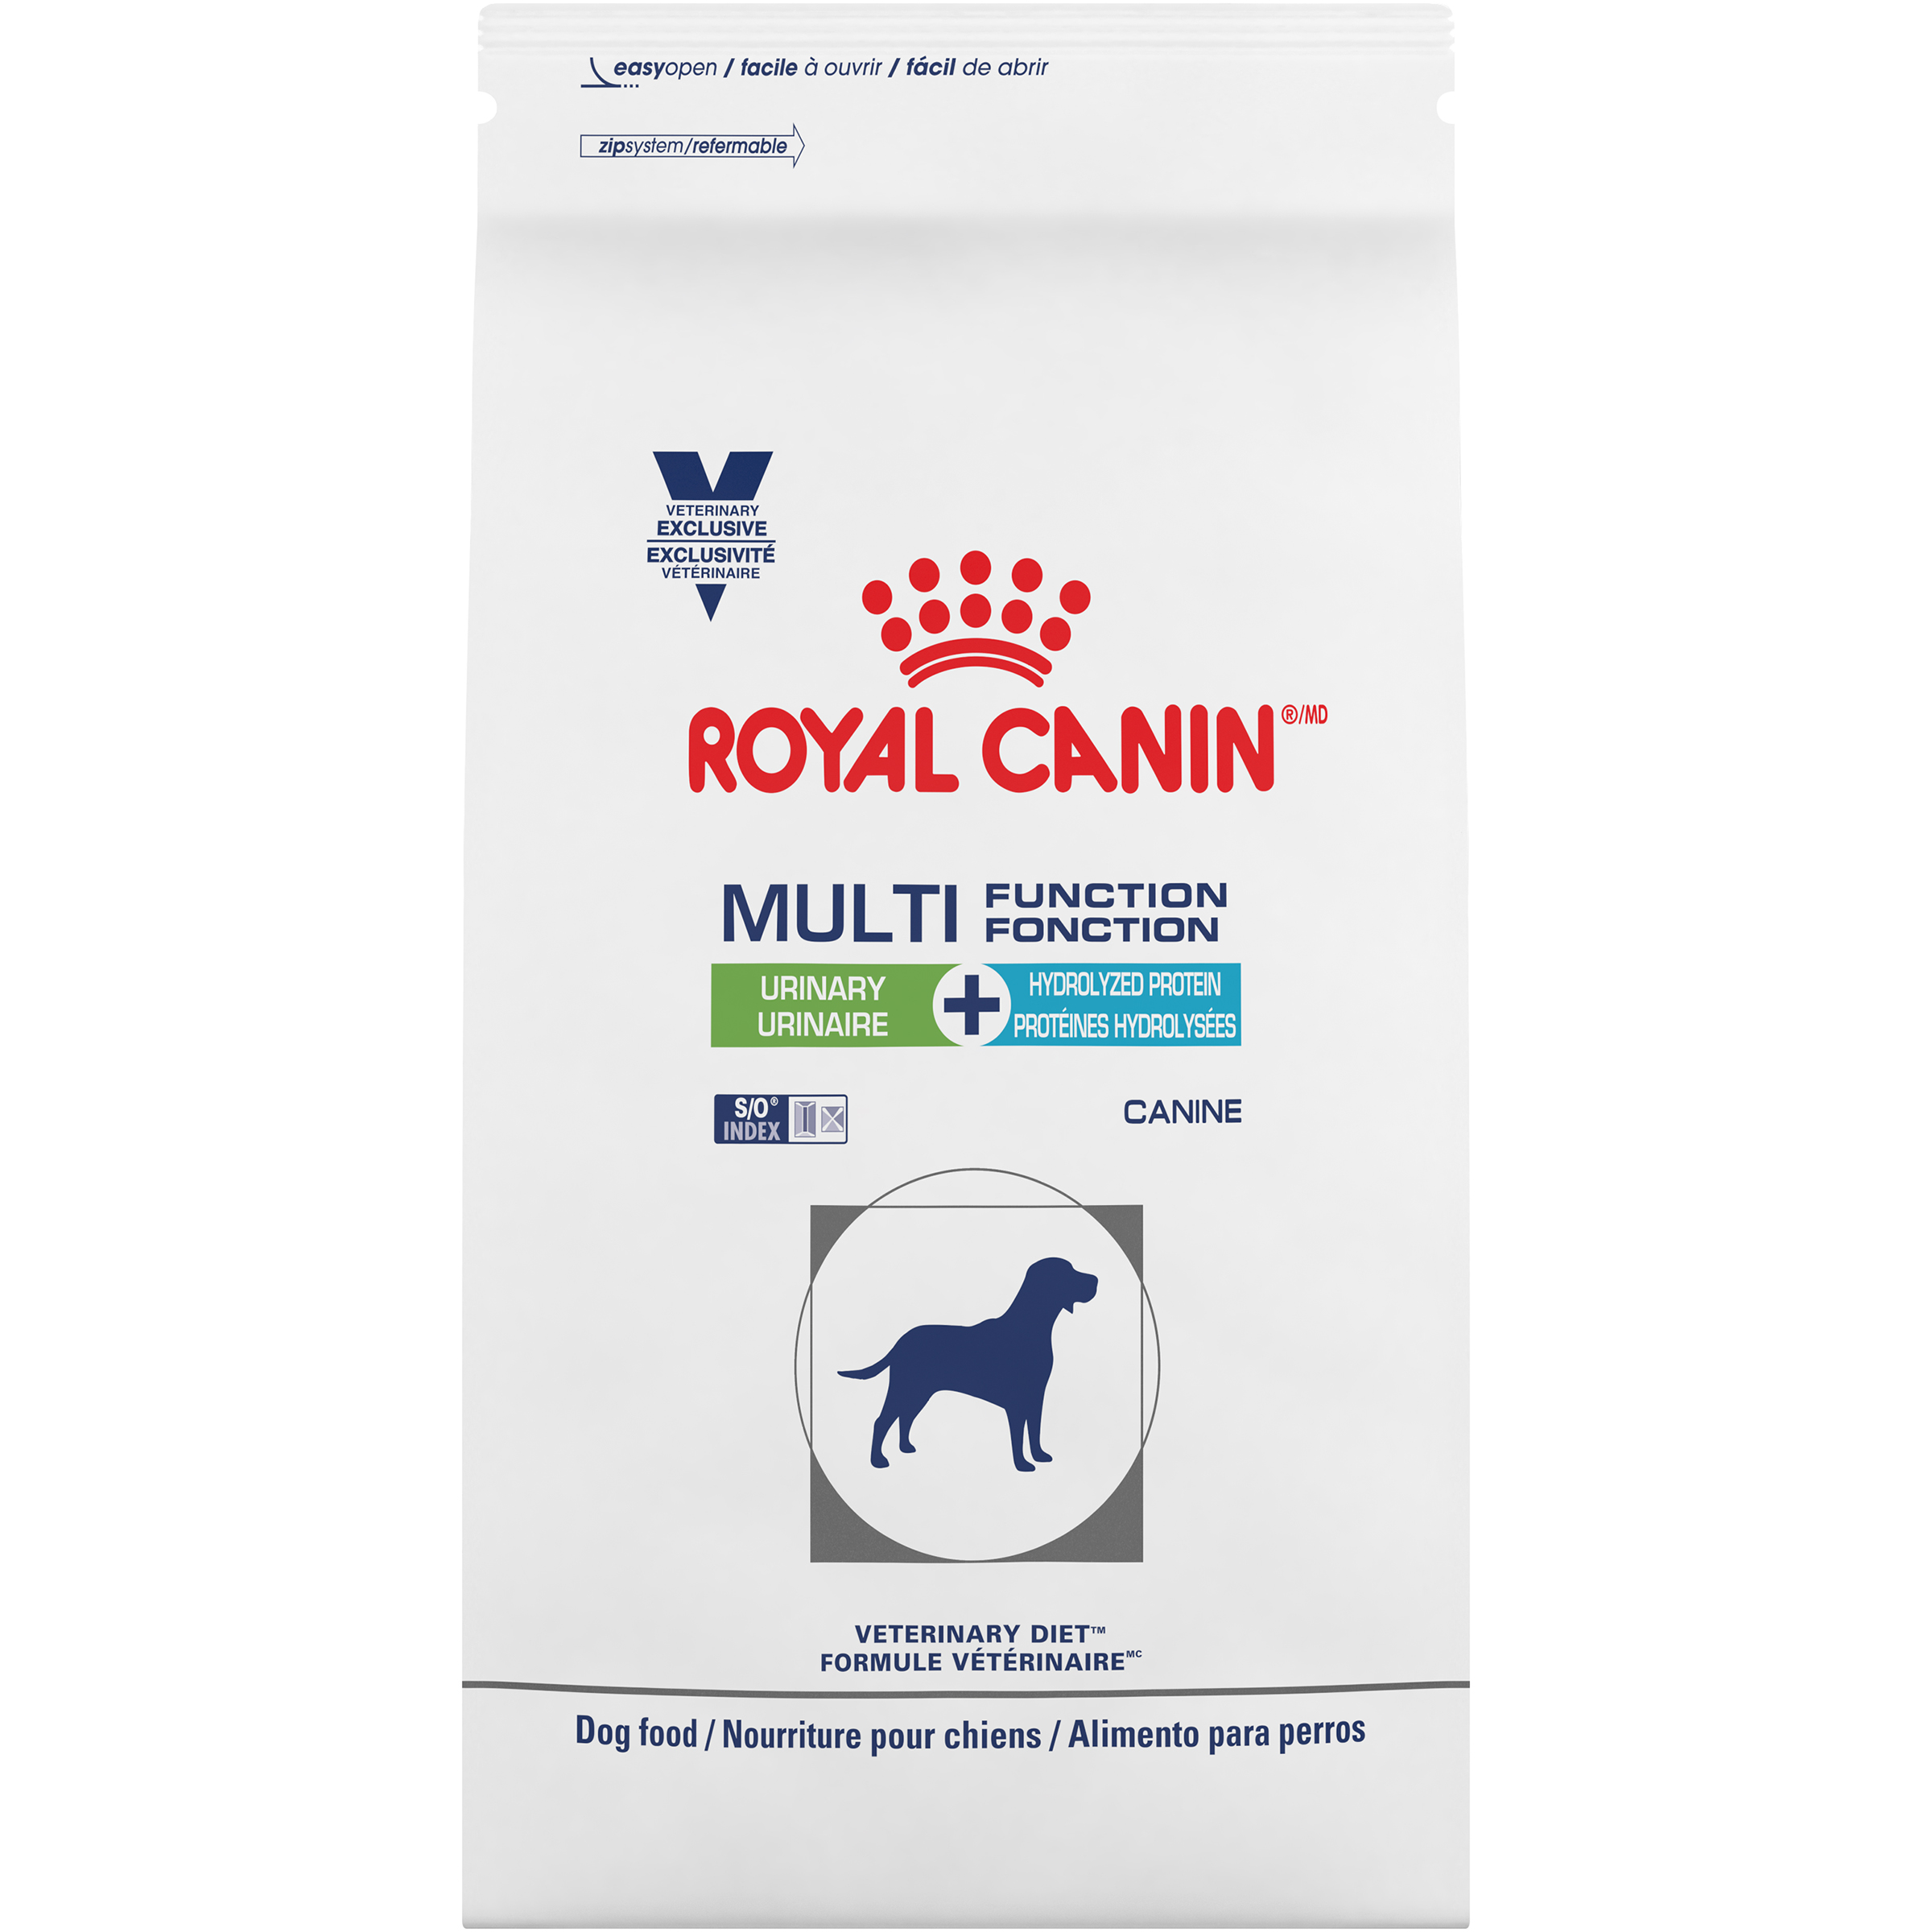 Canine Multifunction Urinary + Hydrolyzed Protein Dry